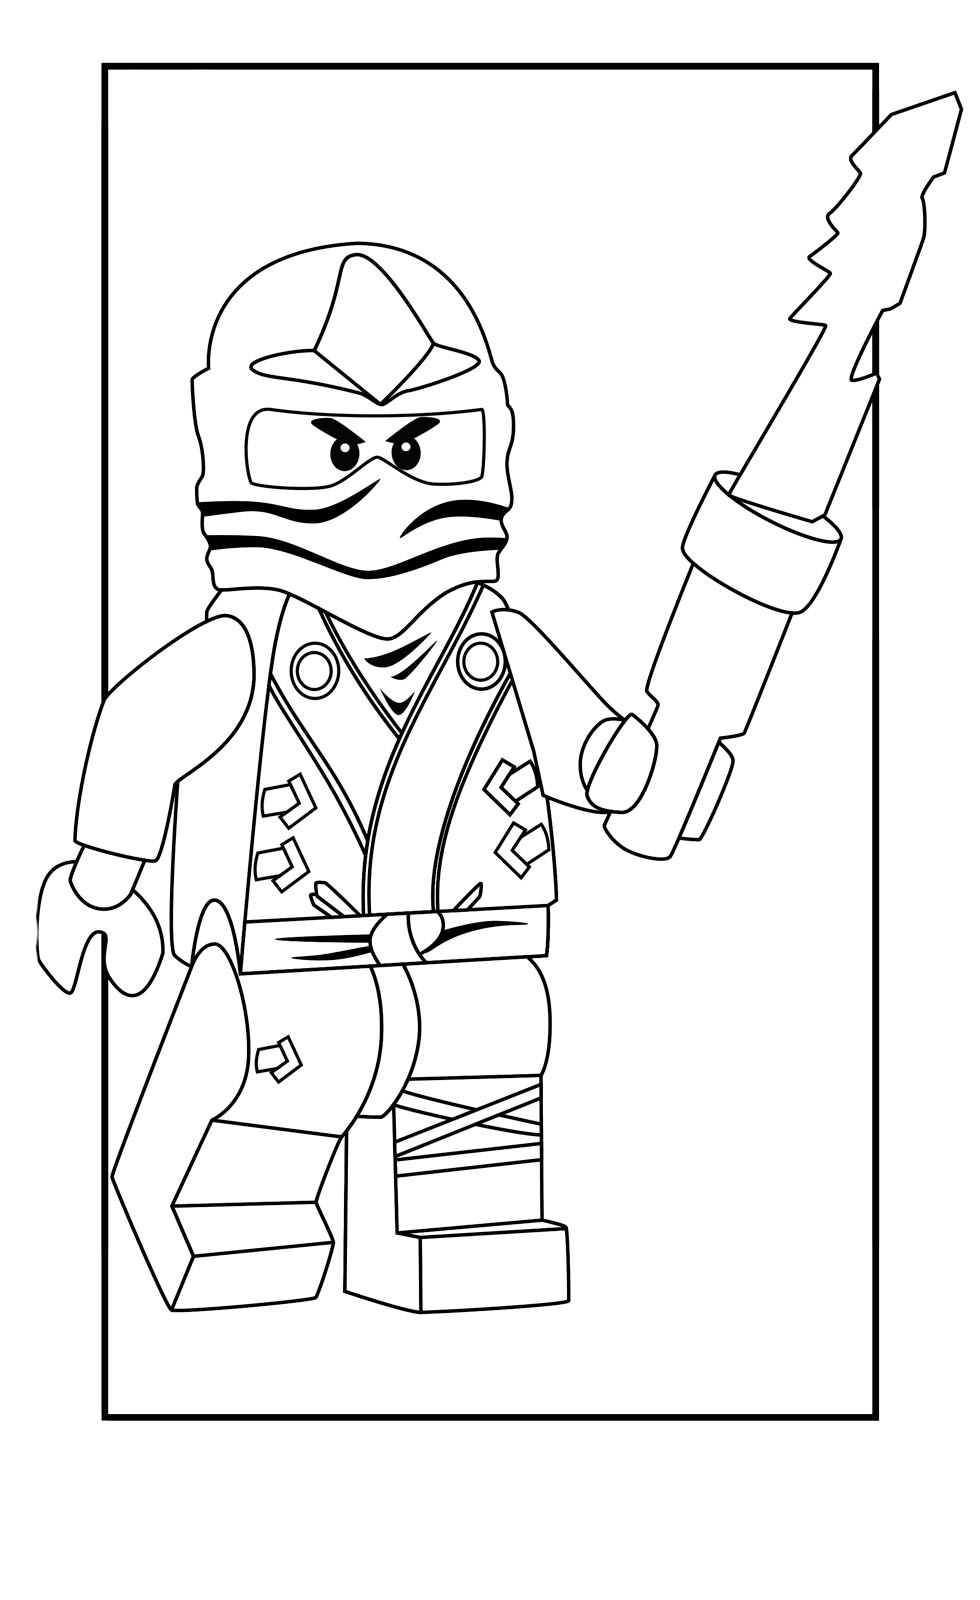 lego ninjago coloring pages to download and print for free